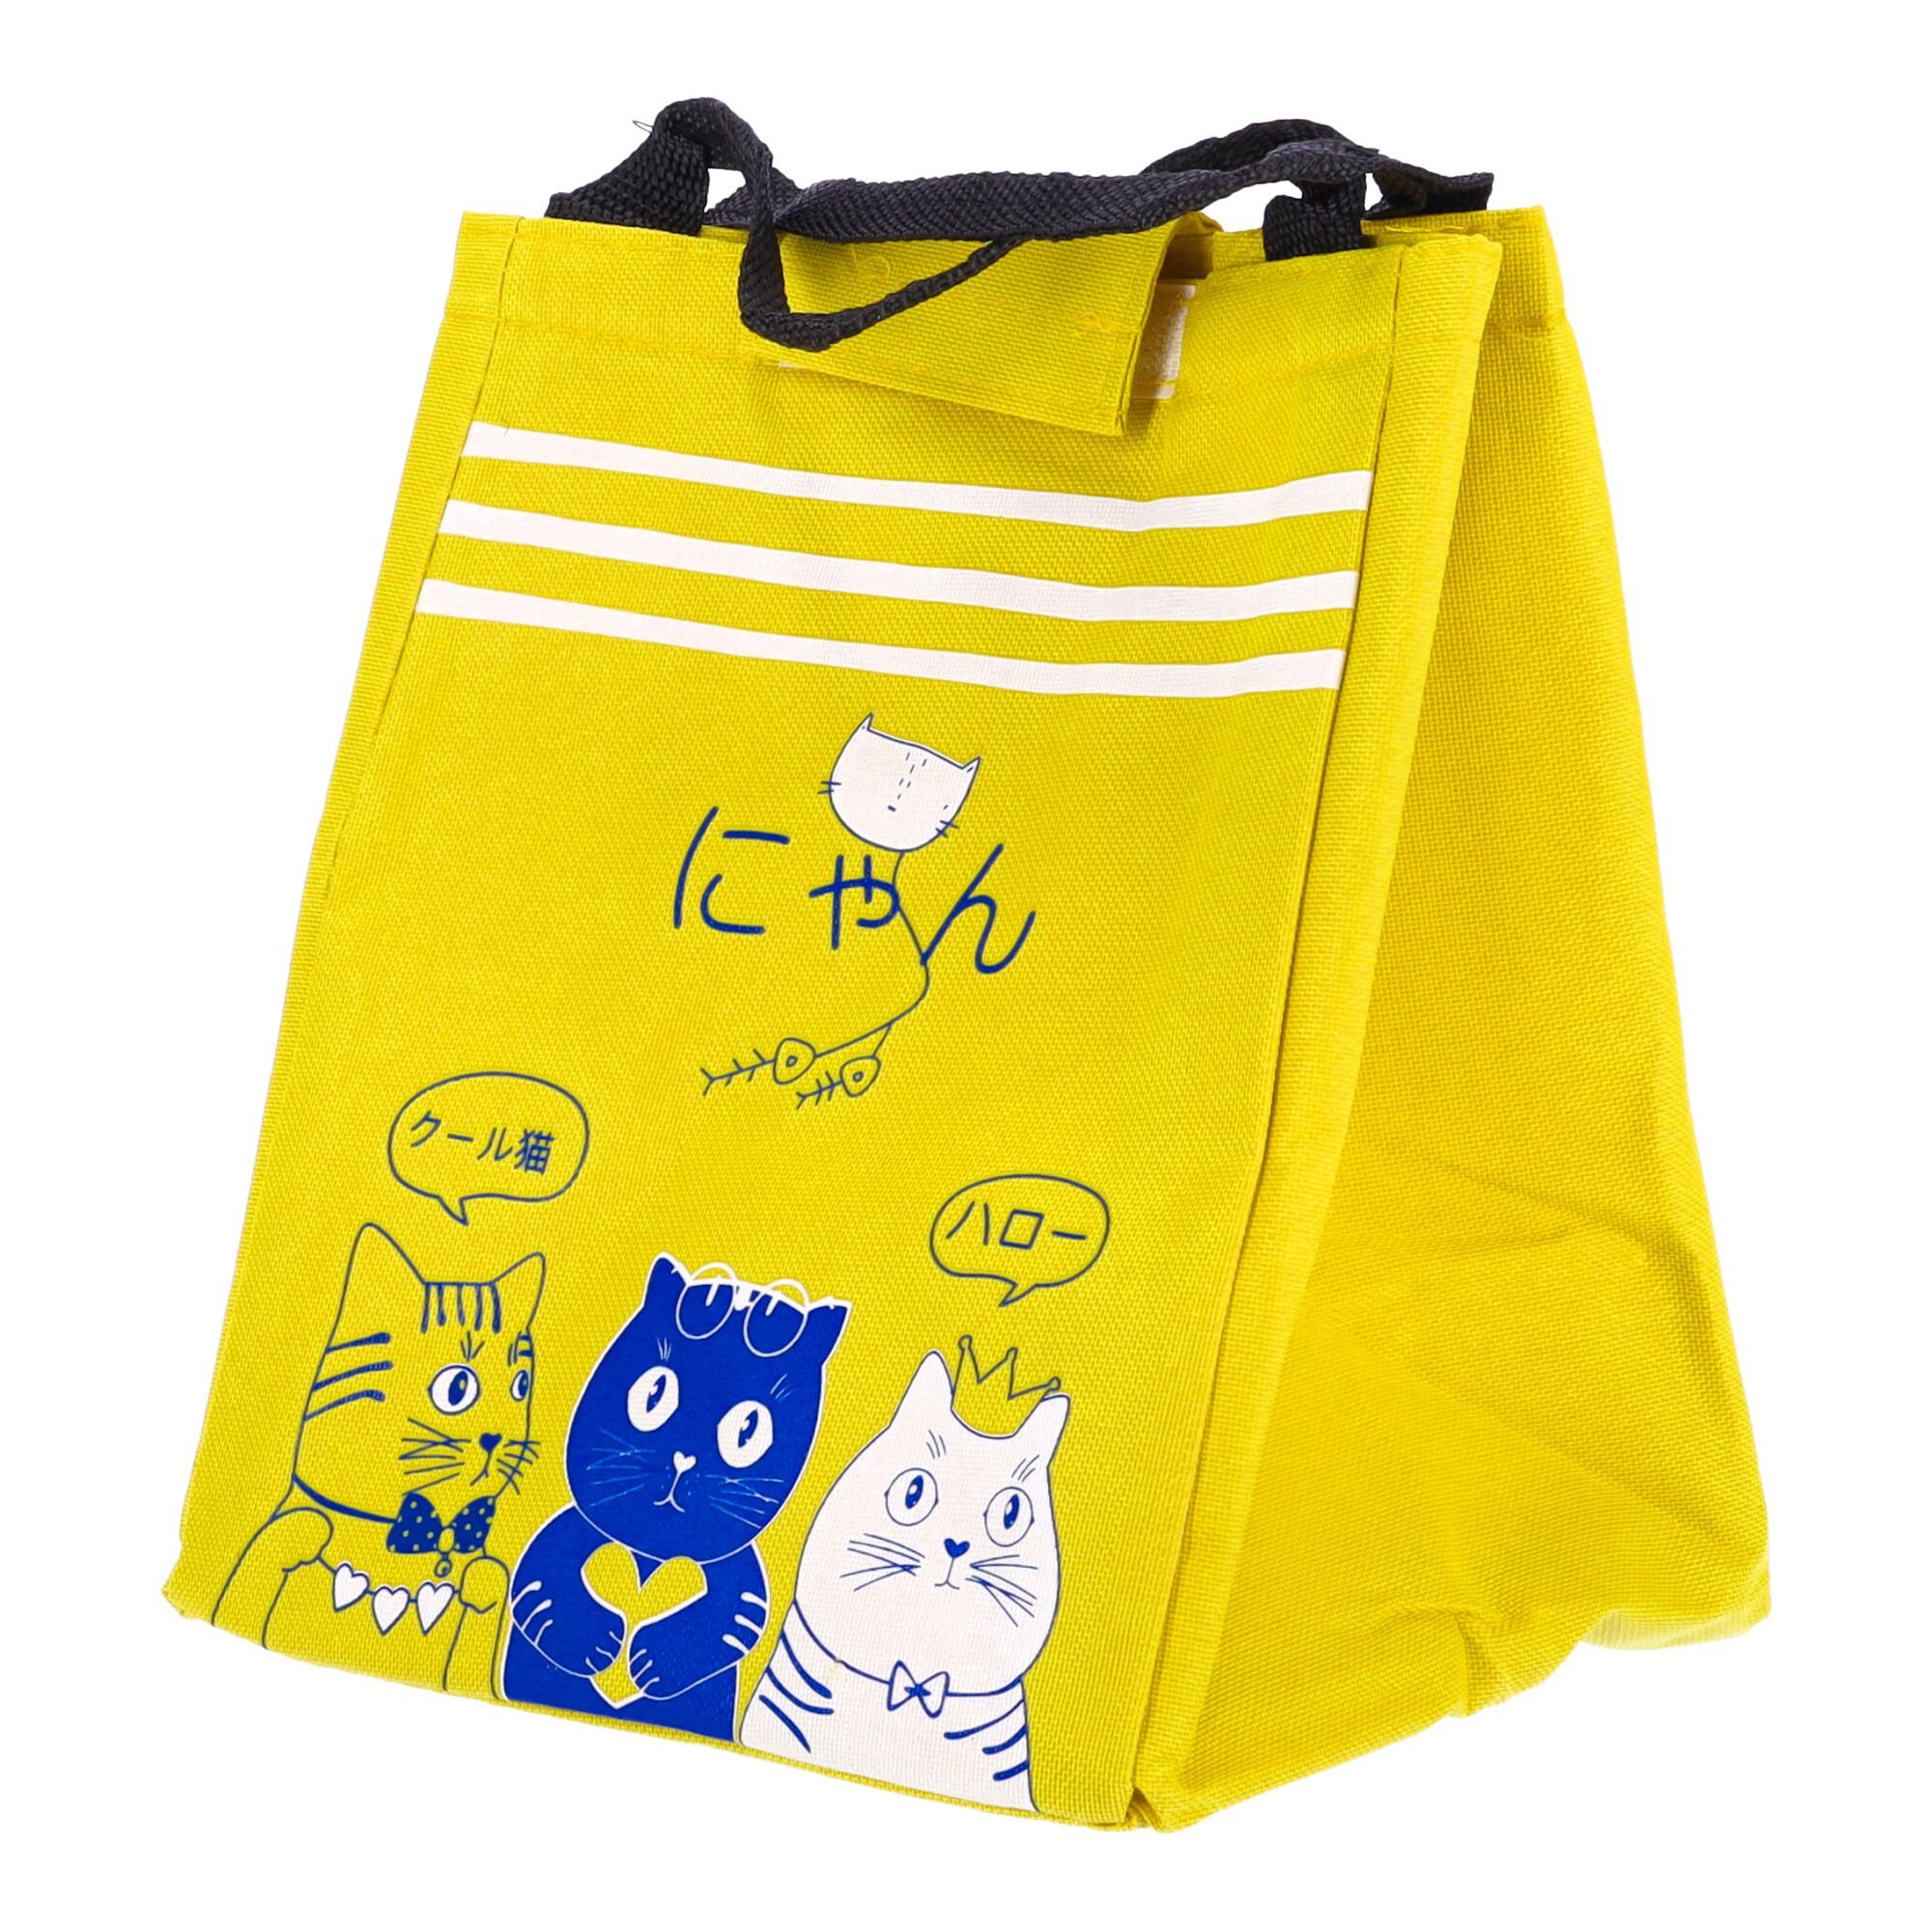 Lunch Box thermal bag - yellow